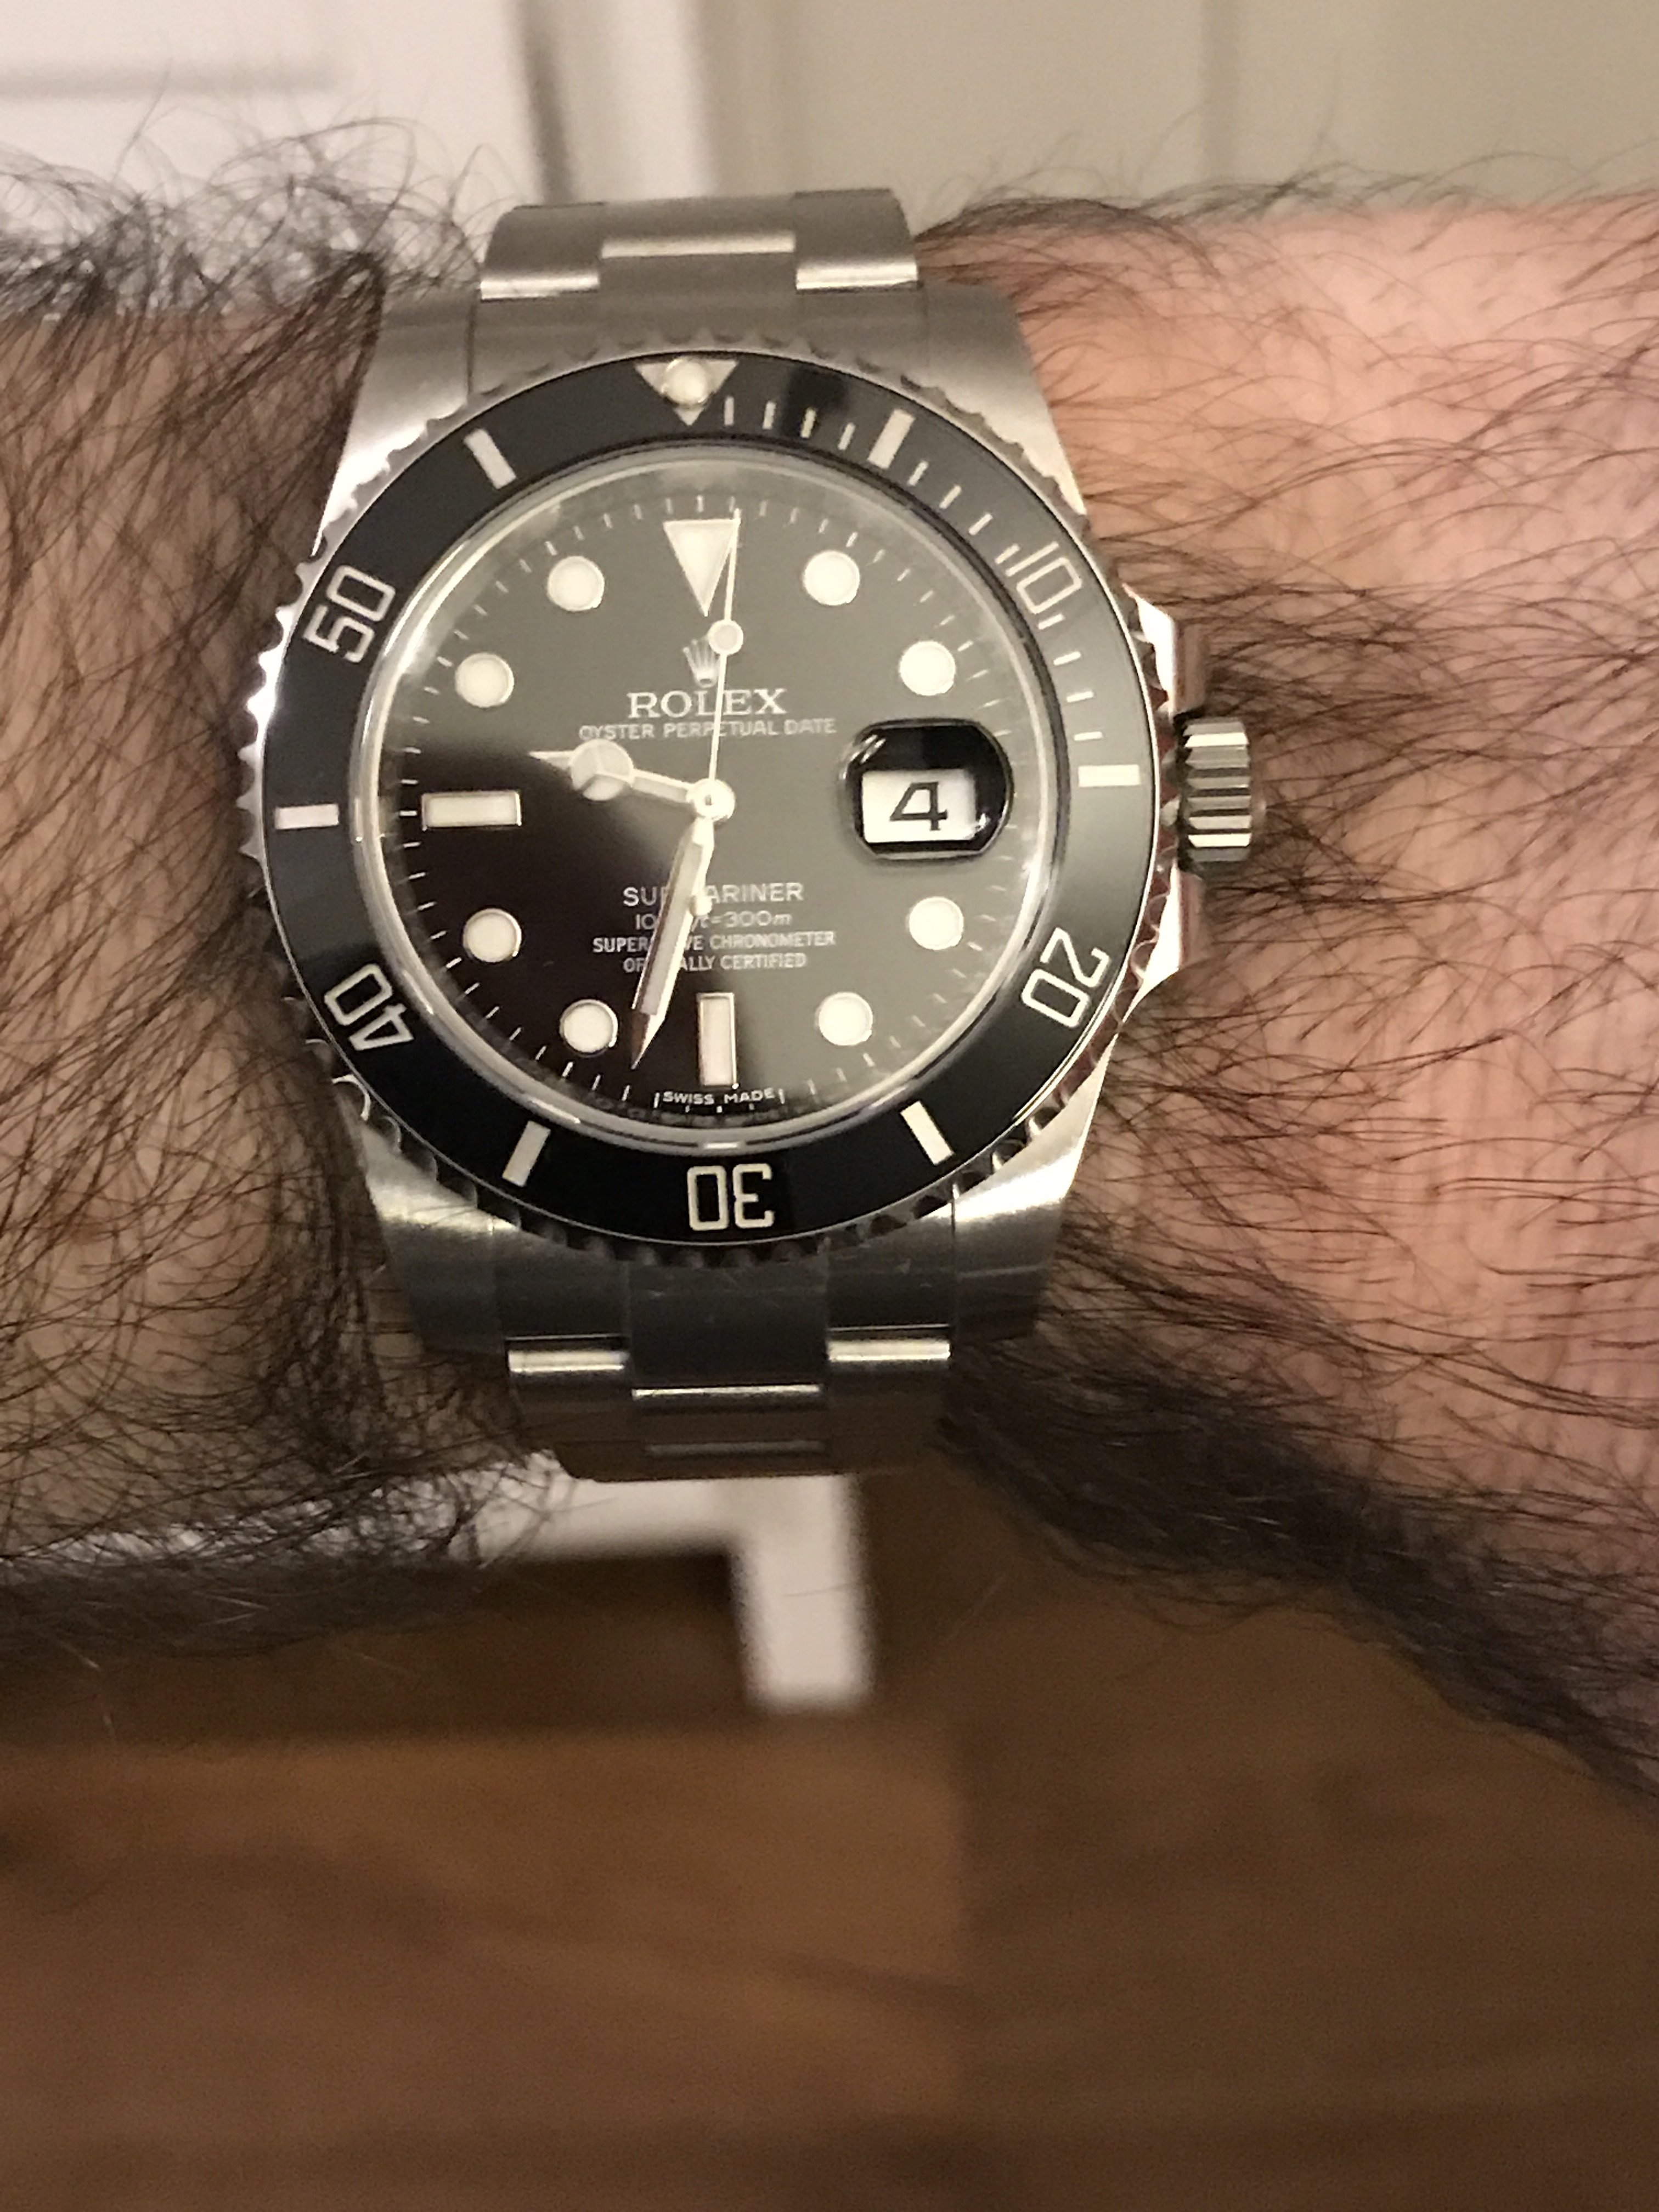 Rolex quality control going down? | Omega Forums